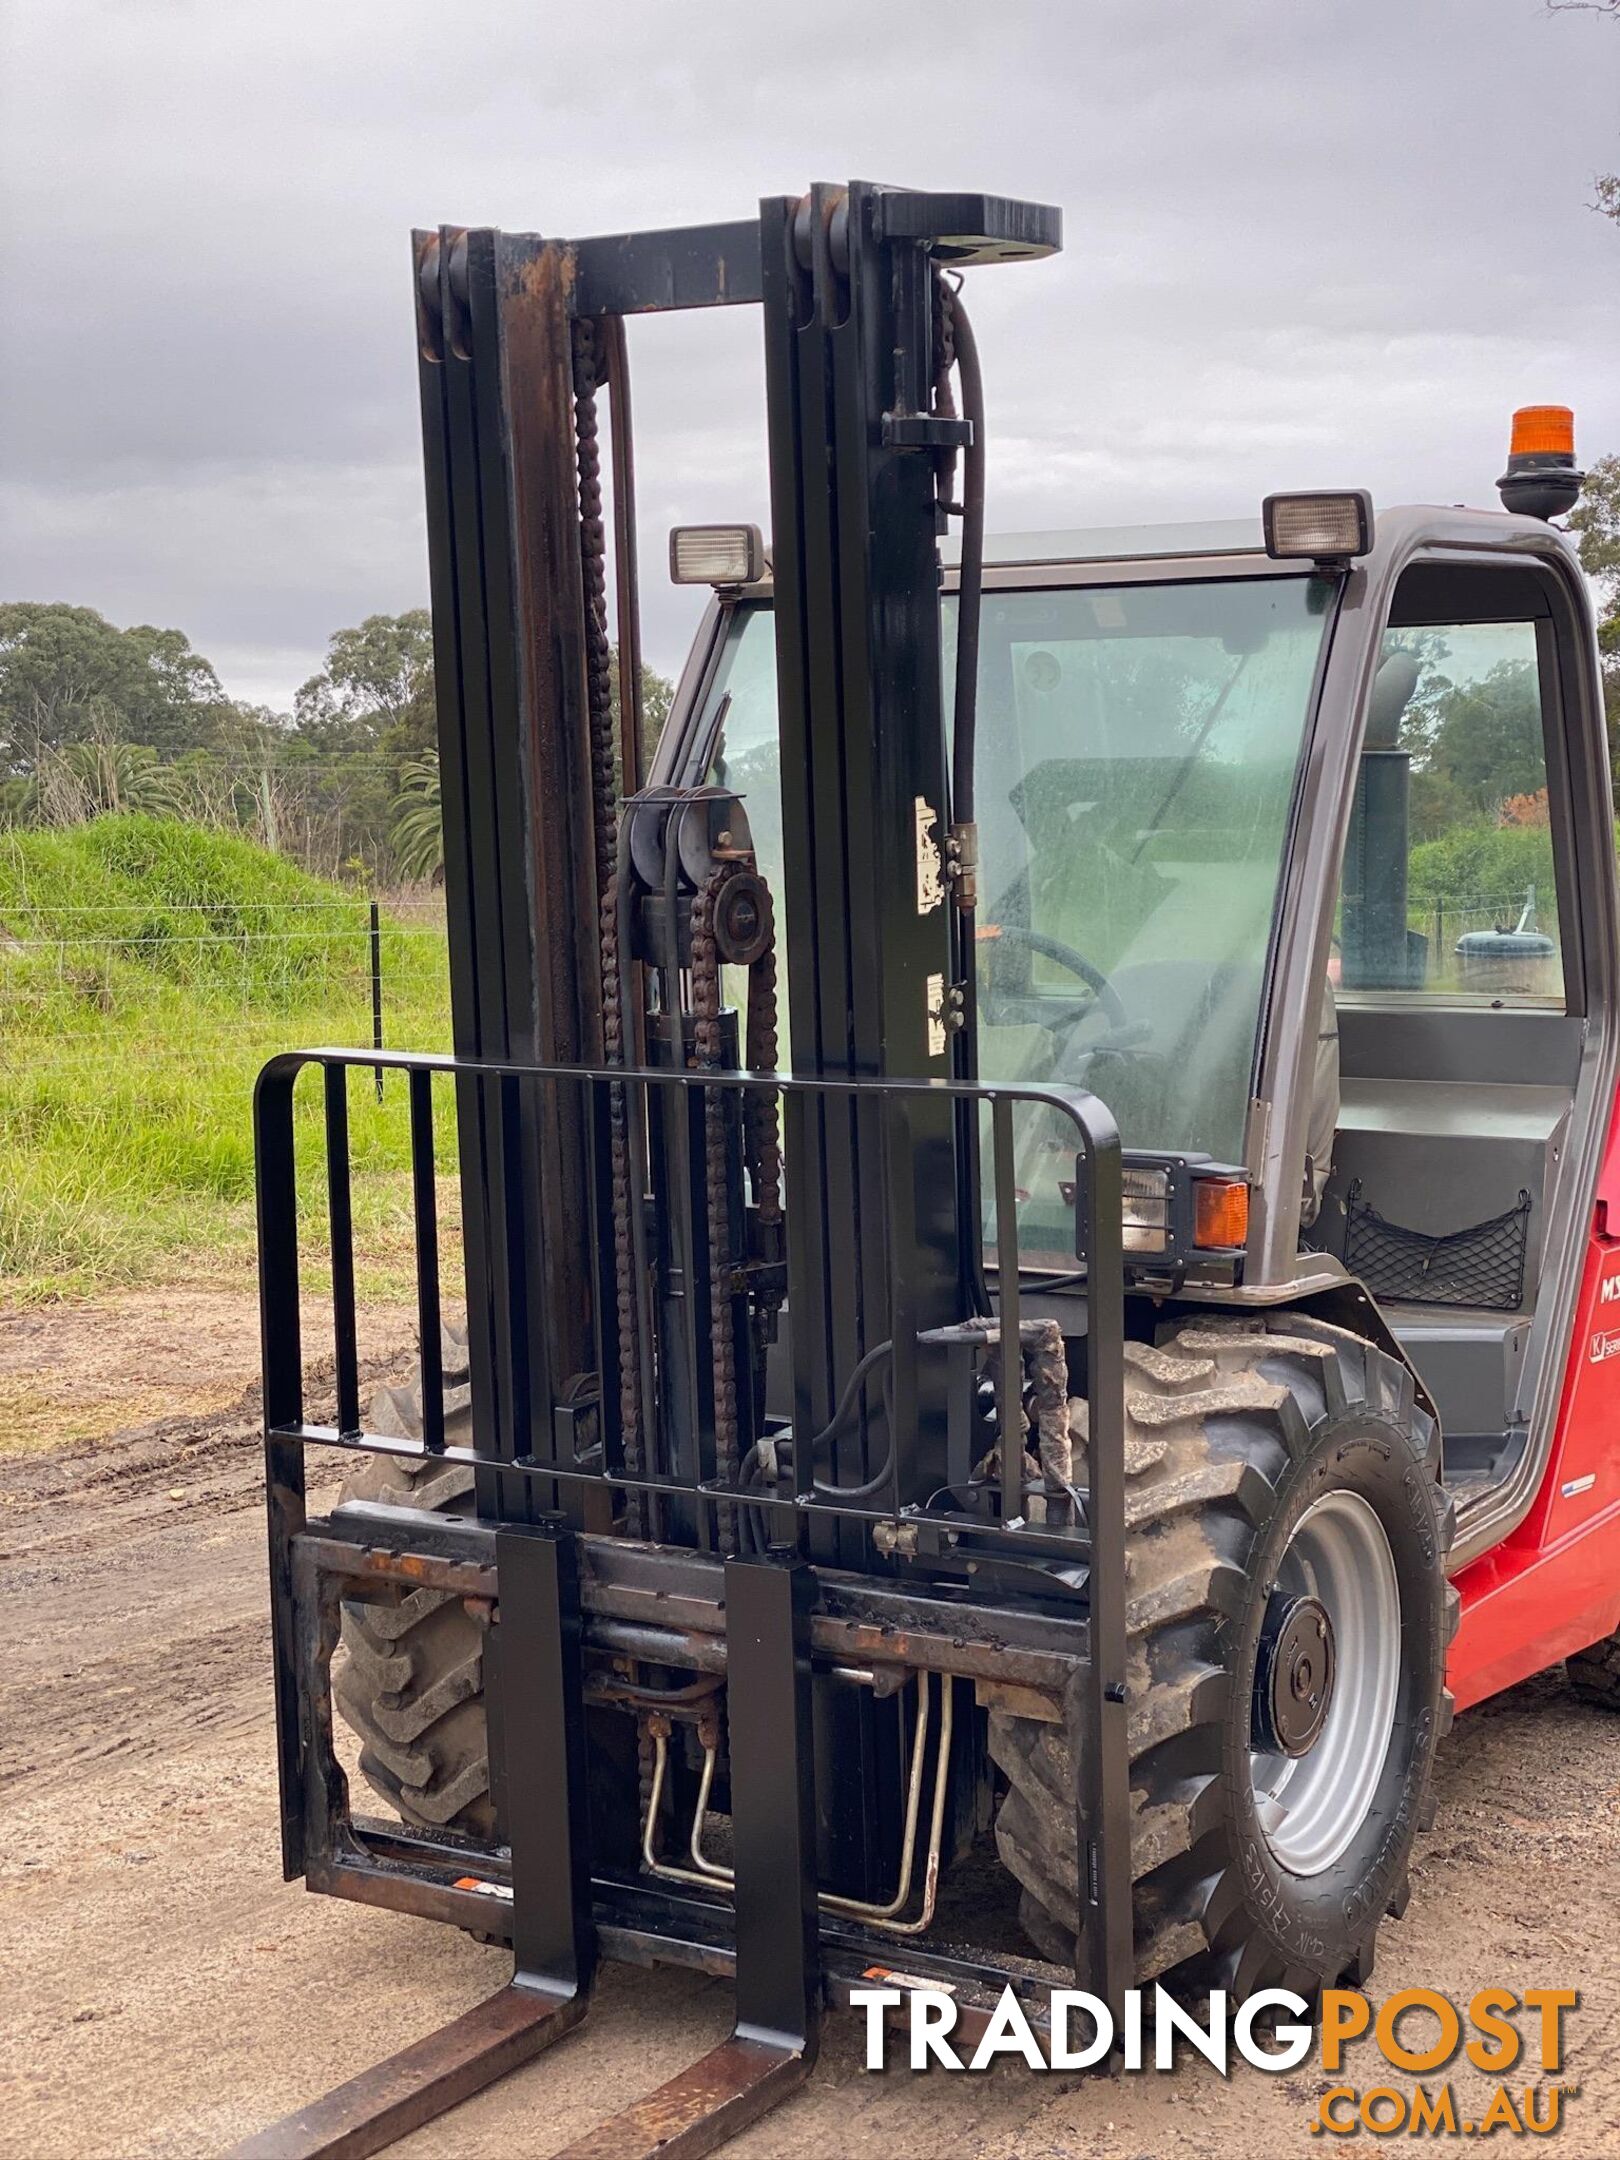 Manitou MSI30T All/Rough Terrain Forklift